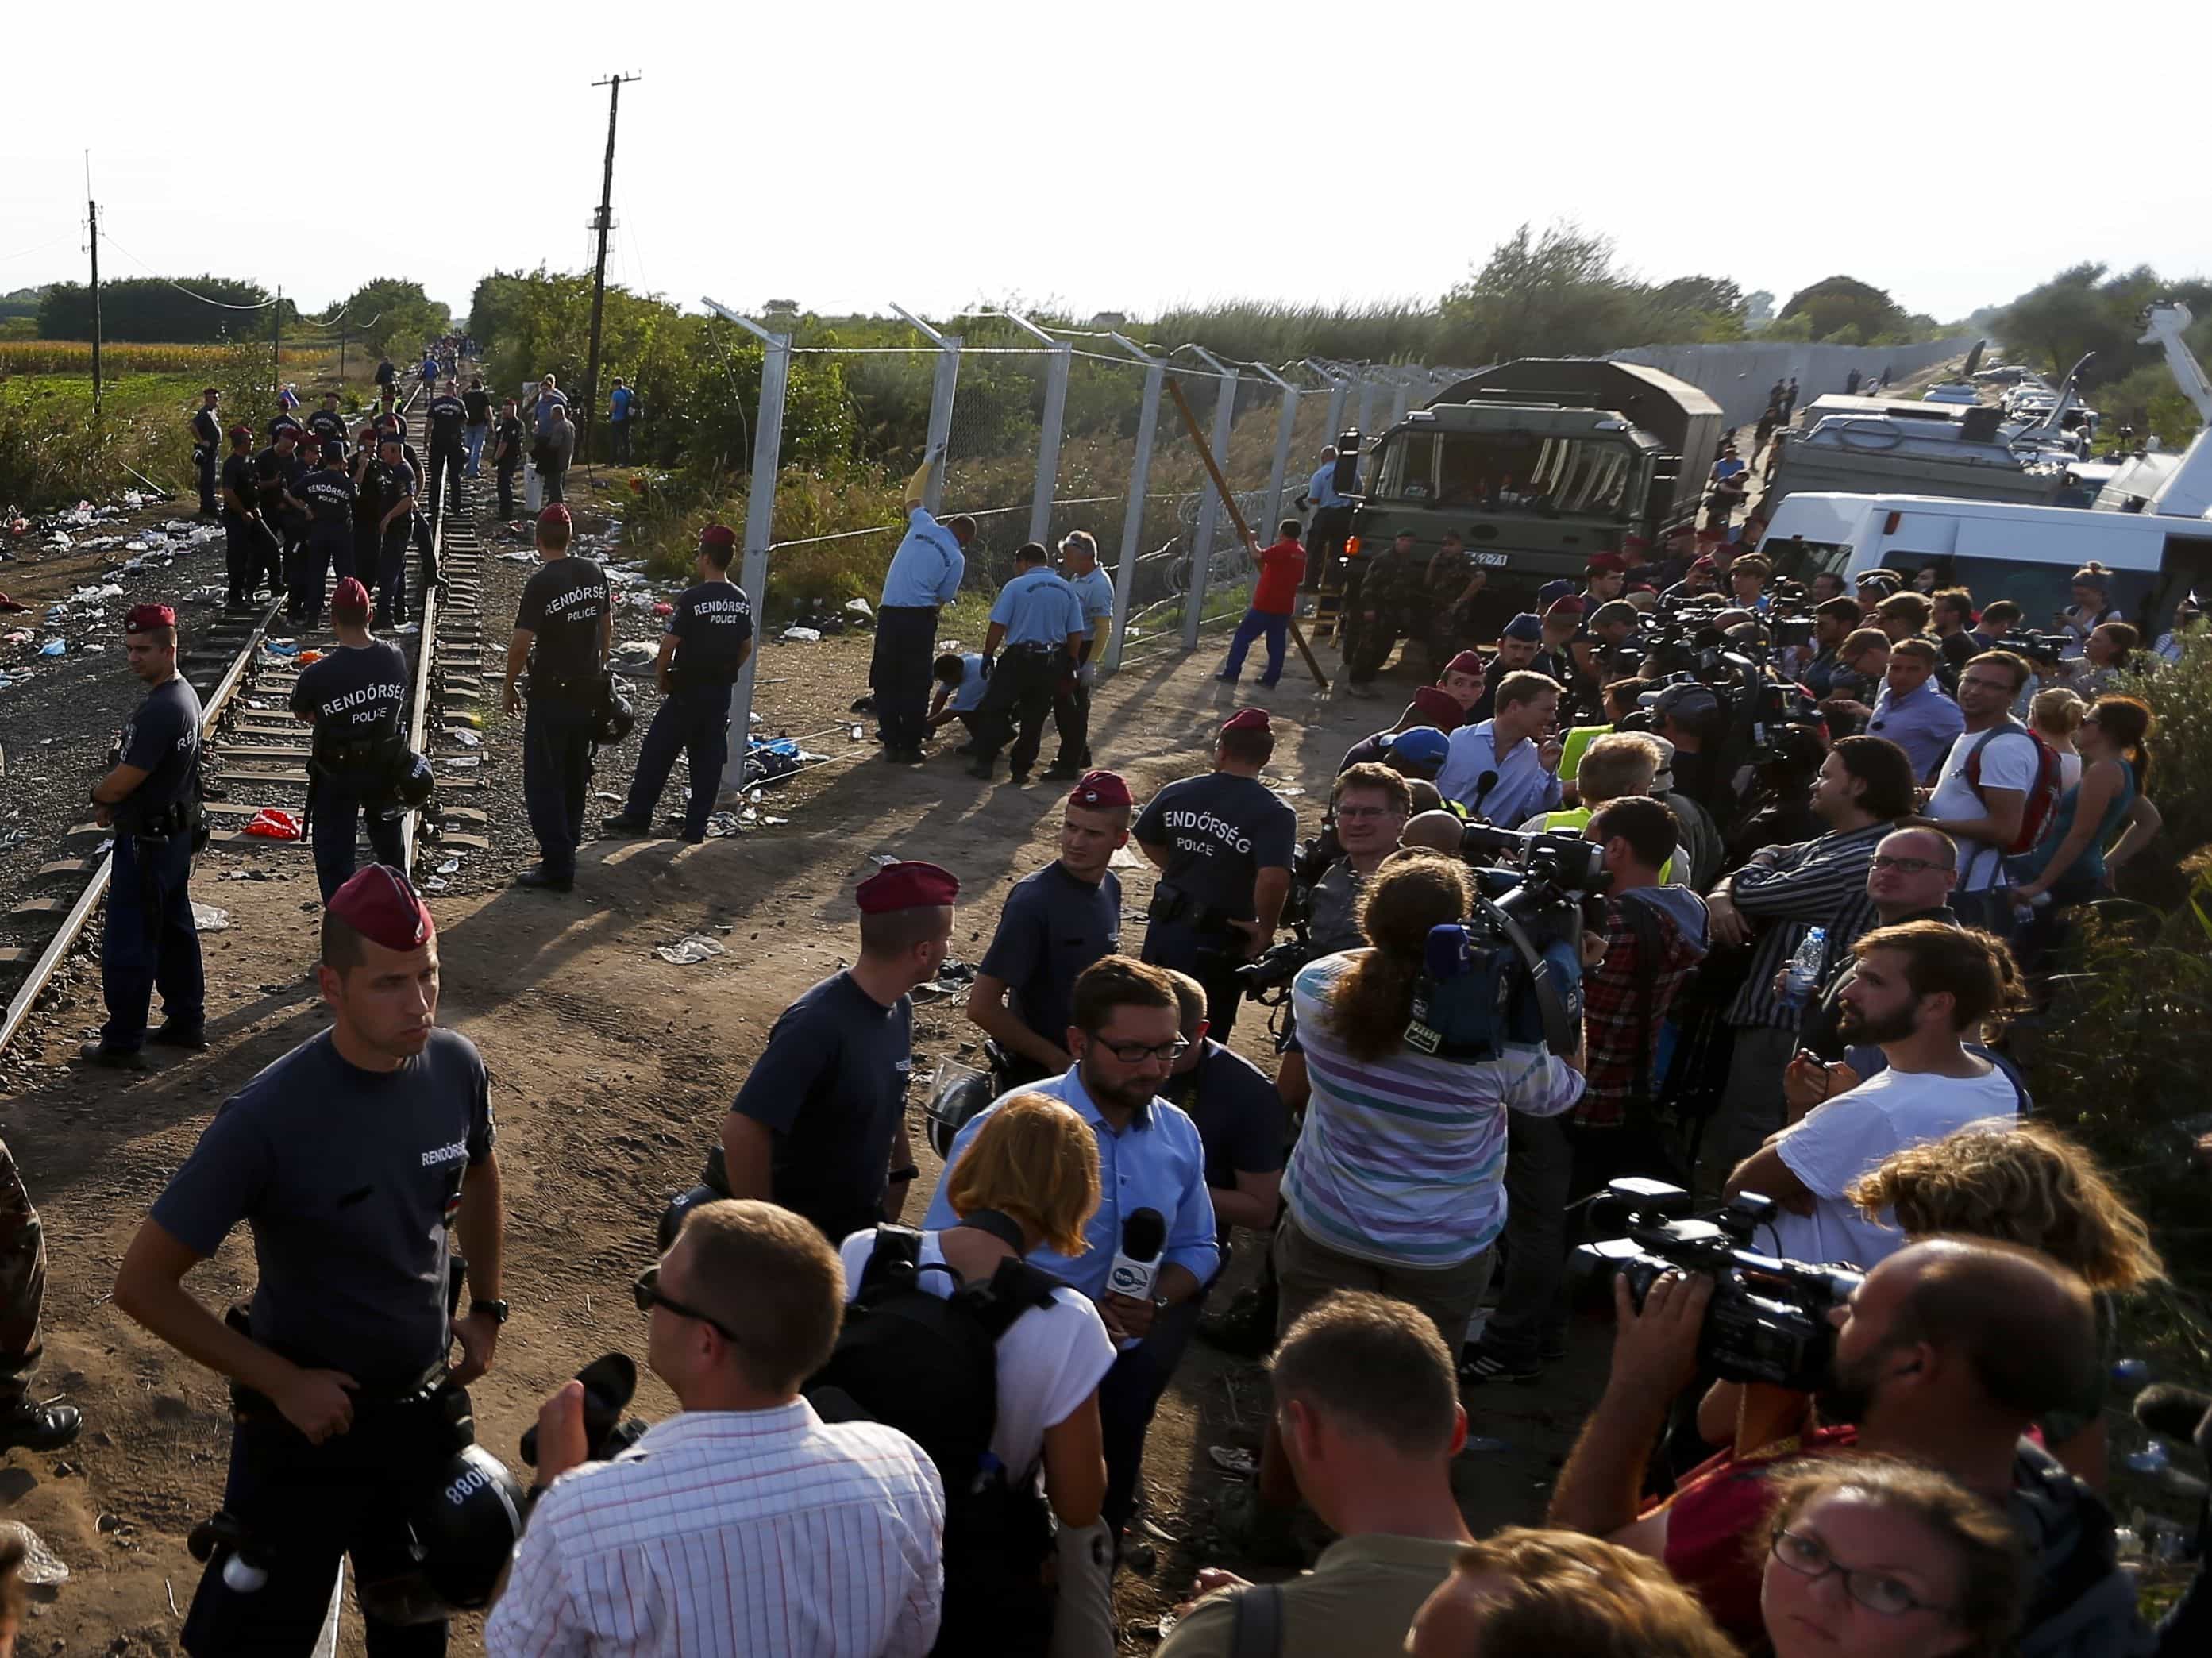 Journalists watch as Hungarian police officers seal off the border with Serbia, near the Hungarian migrant collection point in Roszke, Hungary, 14 September 14 2015, REUTERS/Laszlo Balogh